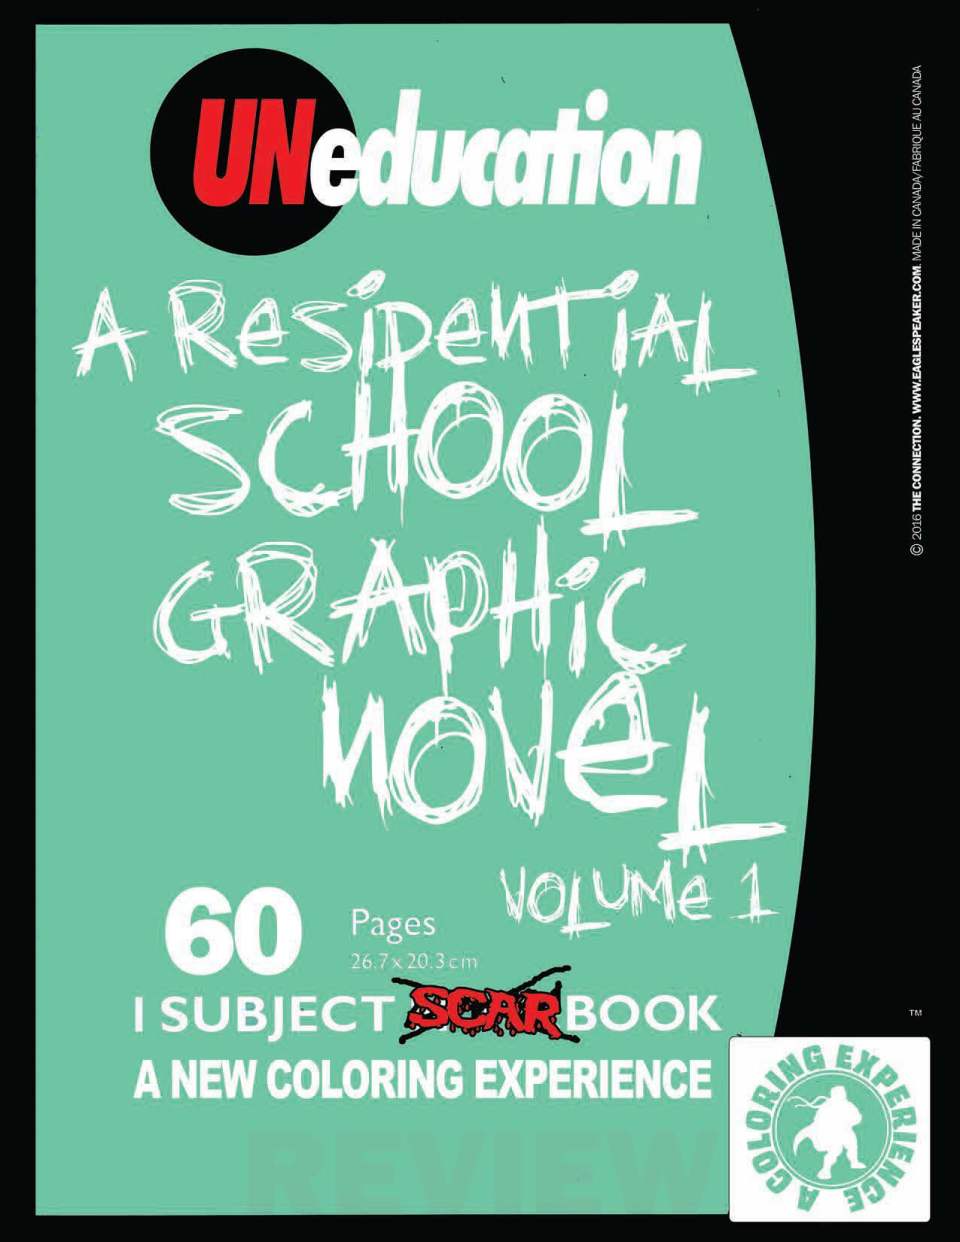 UNeducation+Coloring+Book+(low+res)_Page_01